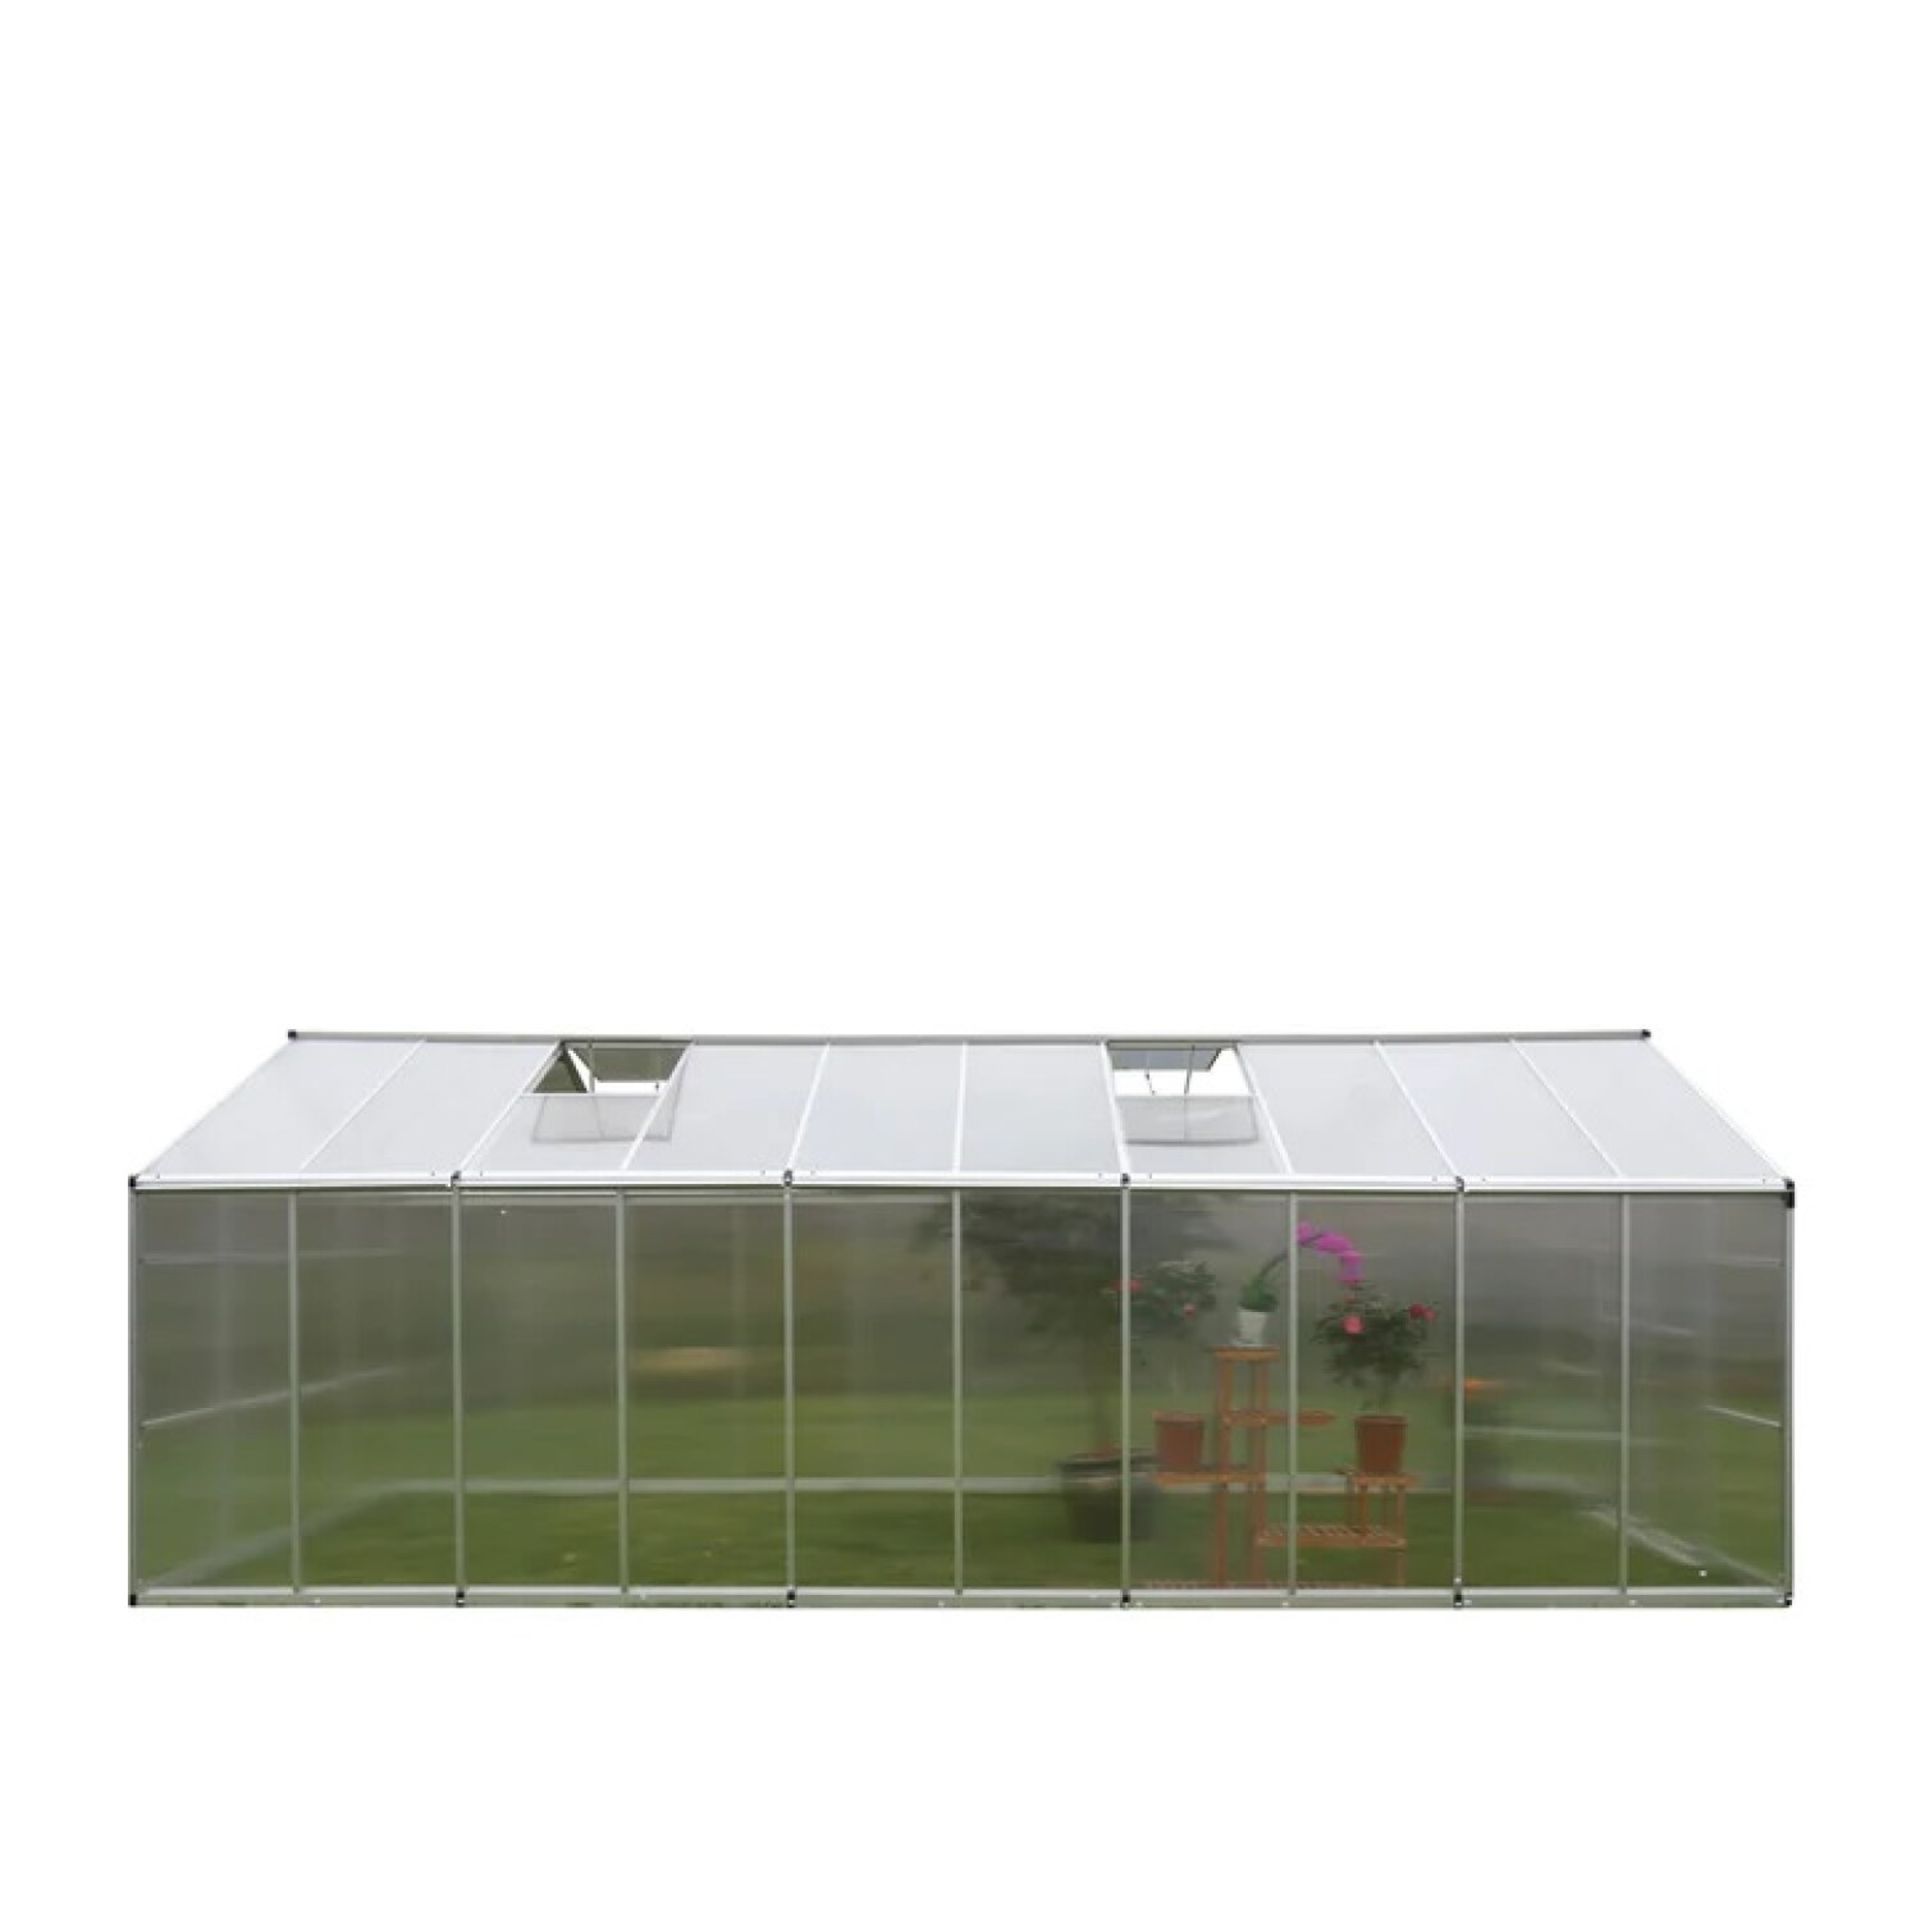 TMG-GH820 TMG INDUSTRIAL 8' X 20' ALUMINUM FRAME GREENHOUSE W/4 MM TWIN WALL POLYCARBONATE PANELS, - Image 5 of 7